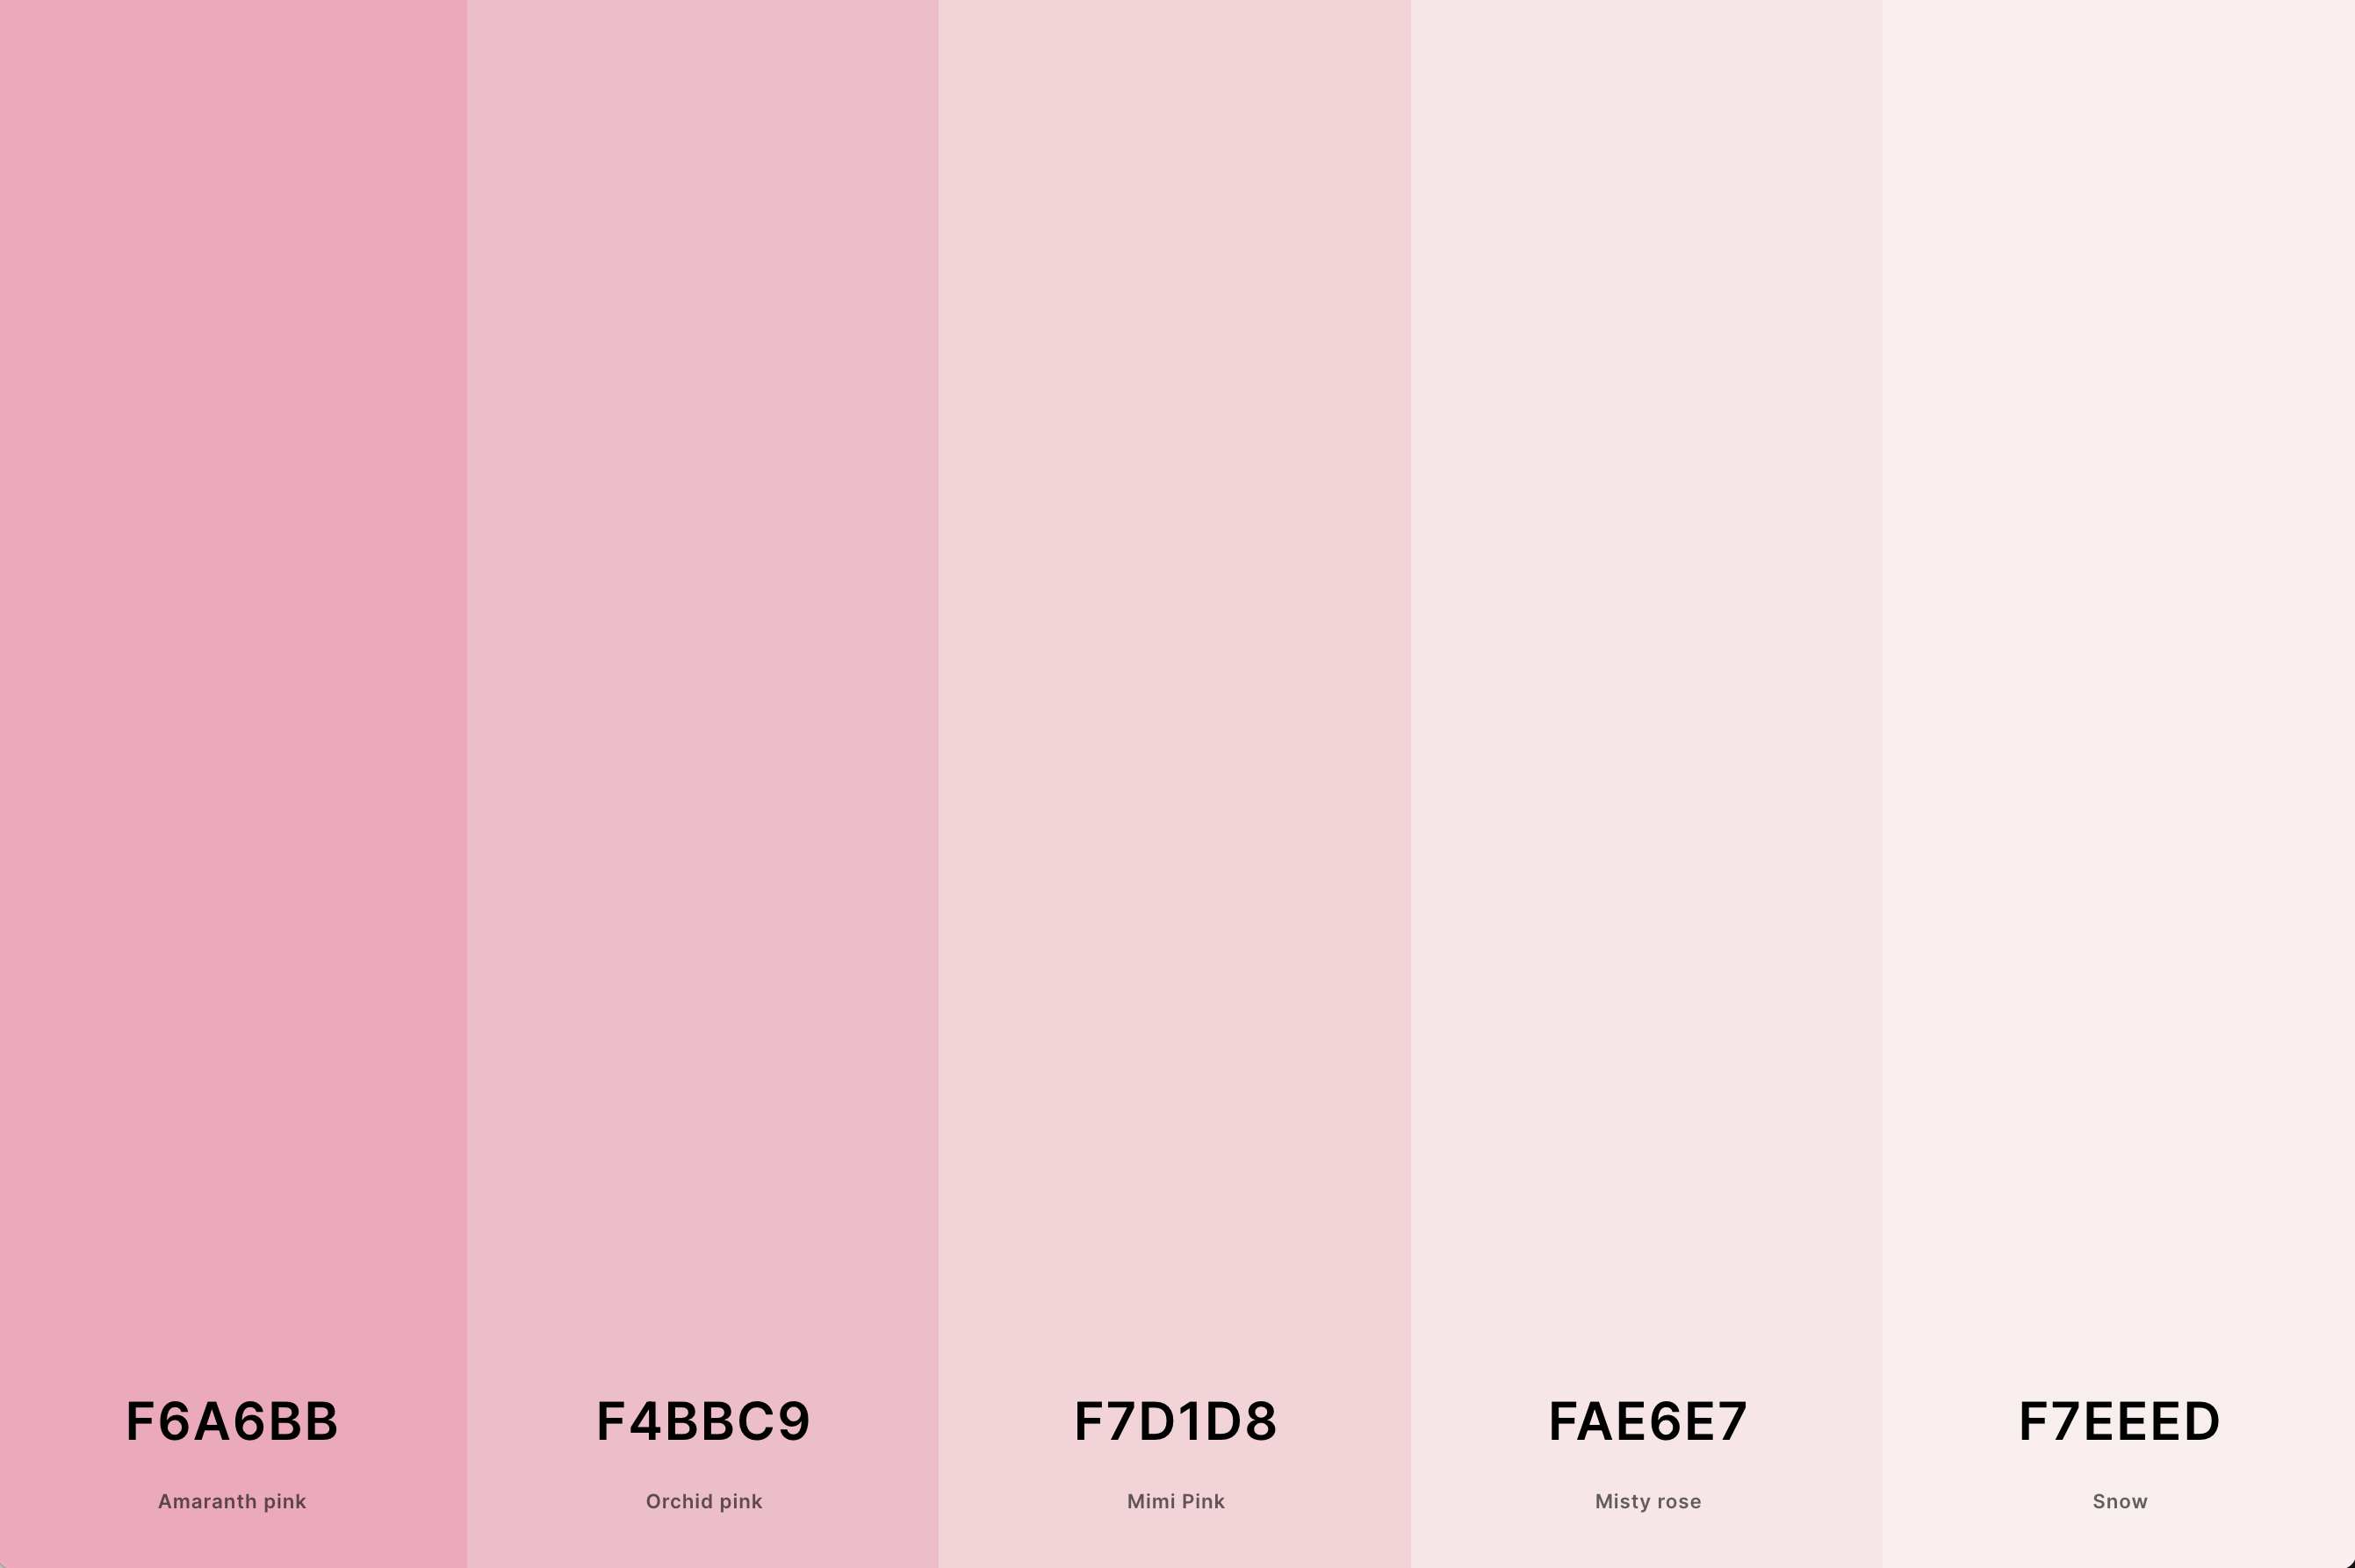 3. Light Pink Color Palette Color Palette with Amaranth Pink (Hex #F6A6BB) + Orchid Pink (Hex #F4BBC9) + Mimi Pink (Hex #F7D1D8) + Misty Rose (Hex #FAE6E7) + Snow (Hex #F7EEED) Color Palette with Hex Codes